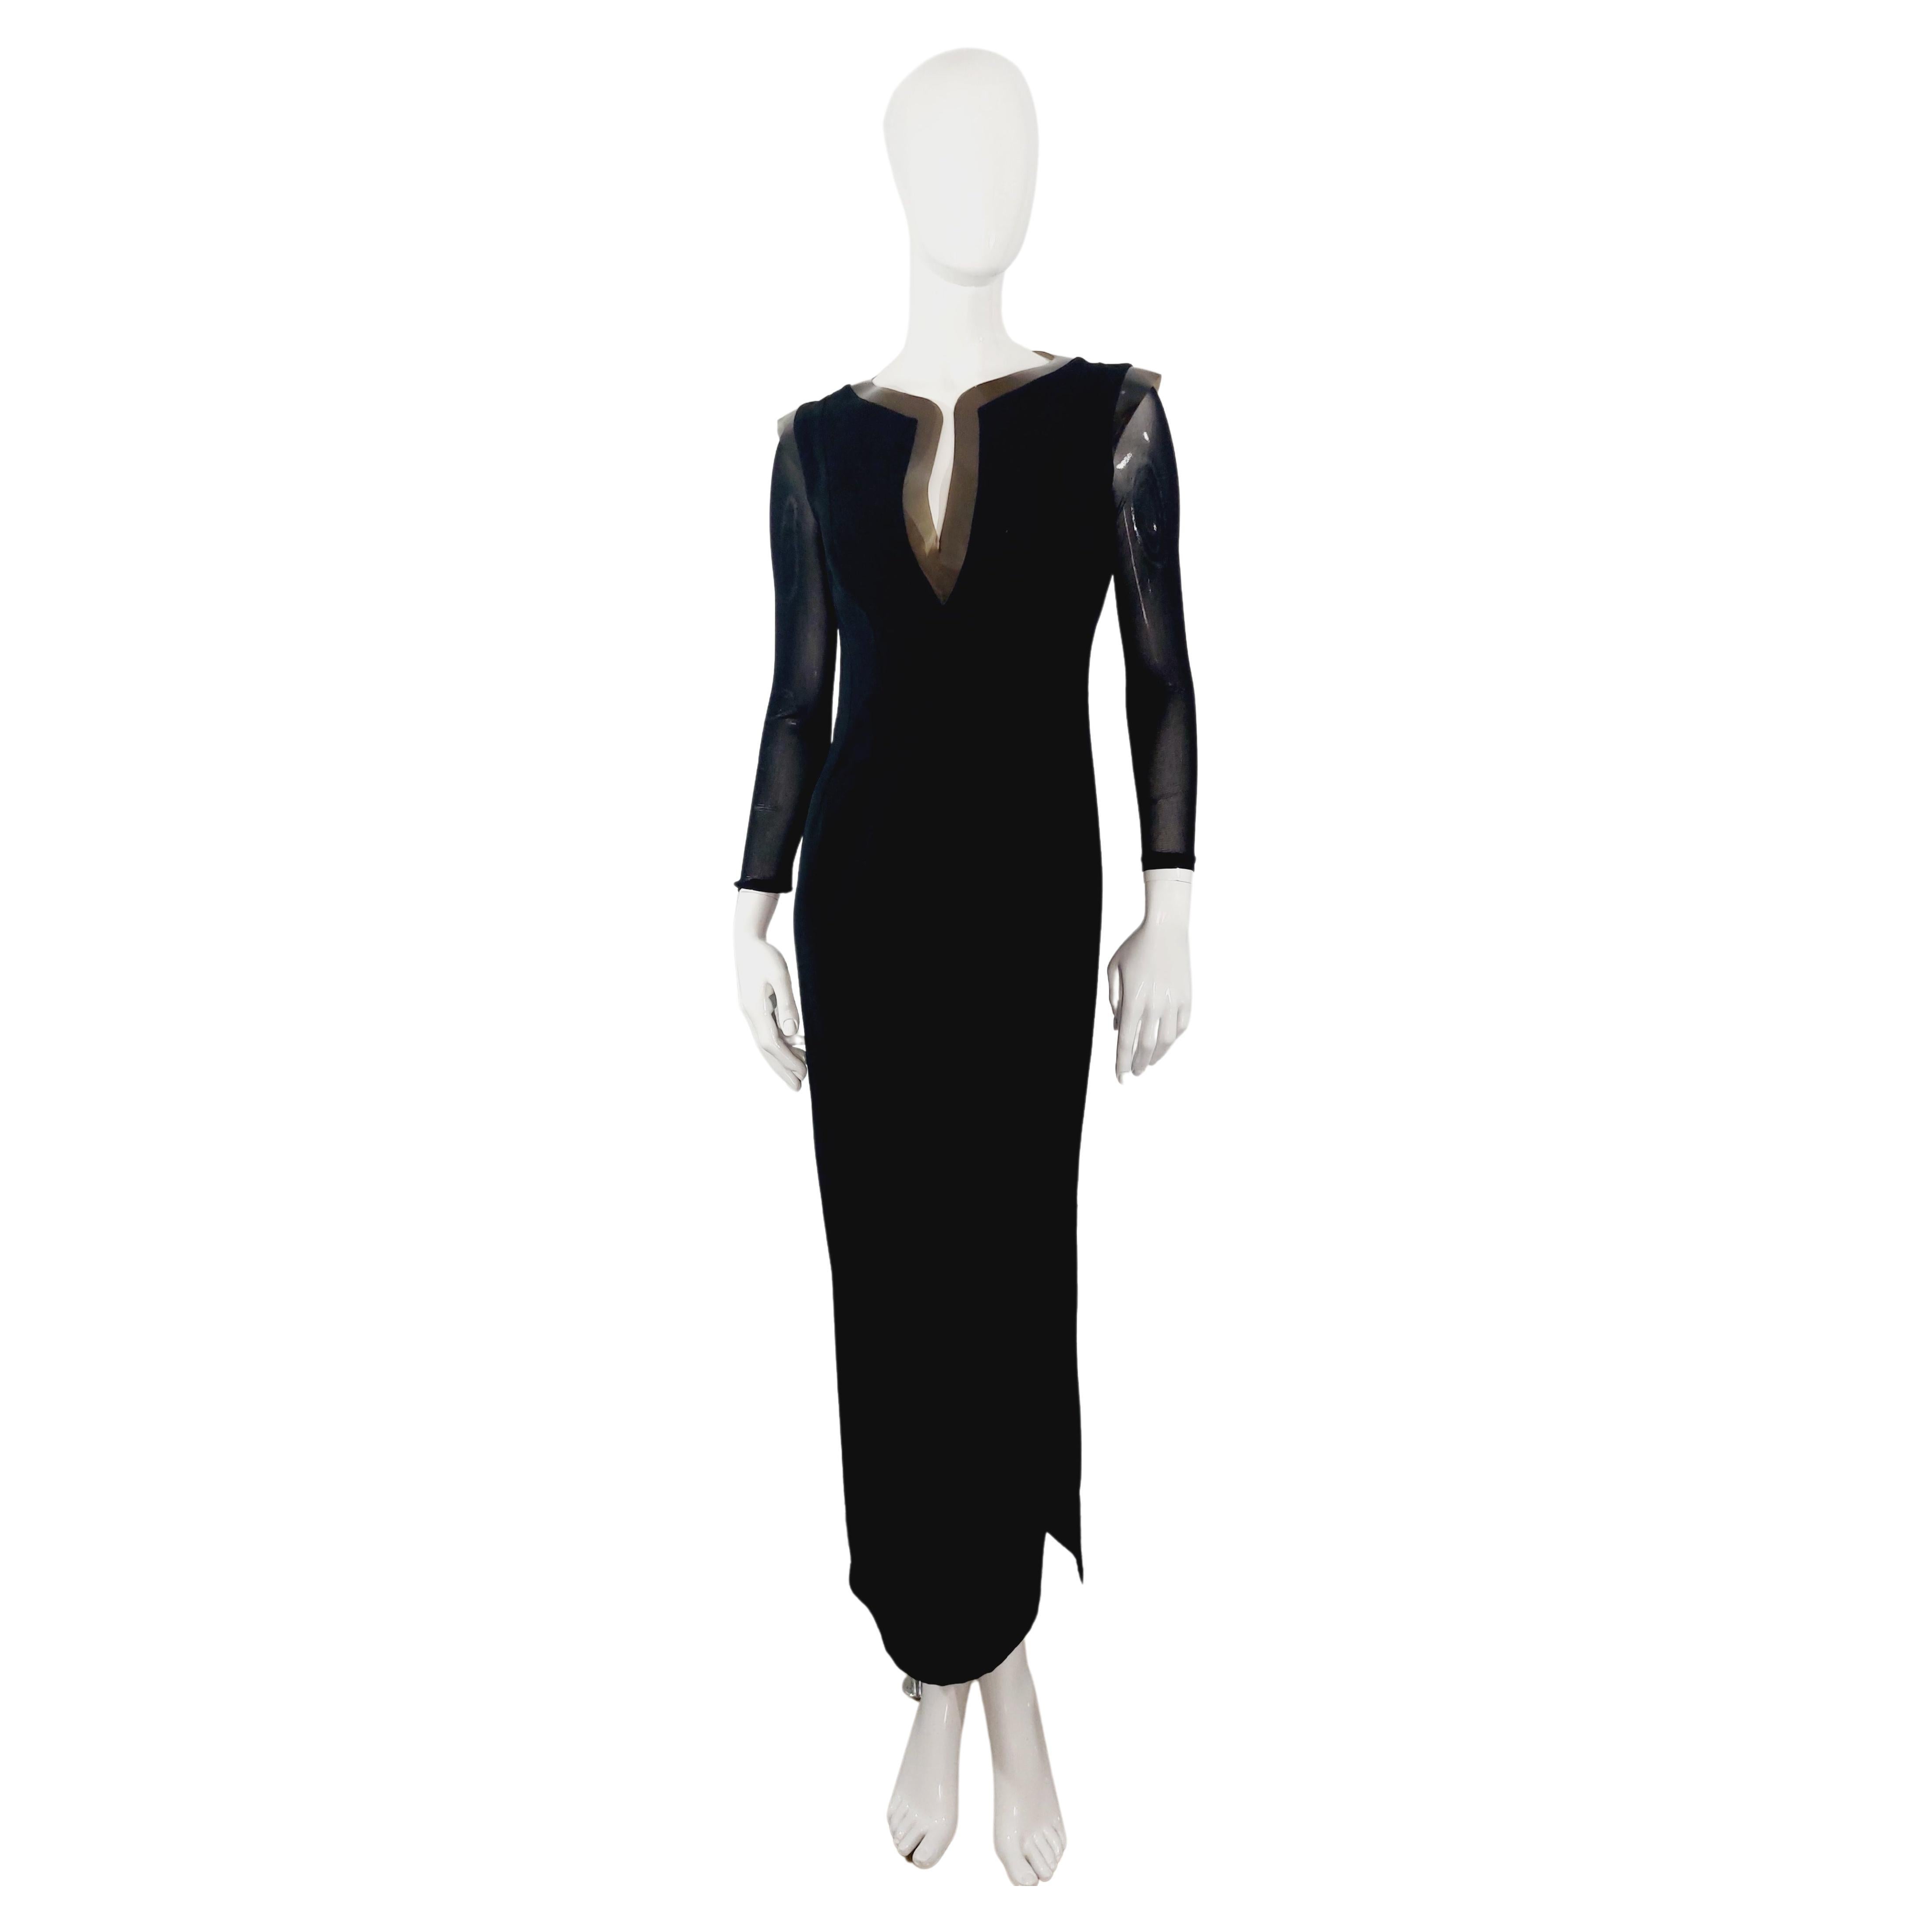 Thierry Mugler Formal Elegant Dress Rubber Tire Mesh Transparent Gown Cocktail Maxi Dress

Mesh/trasparent Sleeves!
Very good condition, exept there is 1 cm tear at the end of the V neckline.
Barely visible, please check the photos!

Best fit: